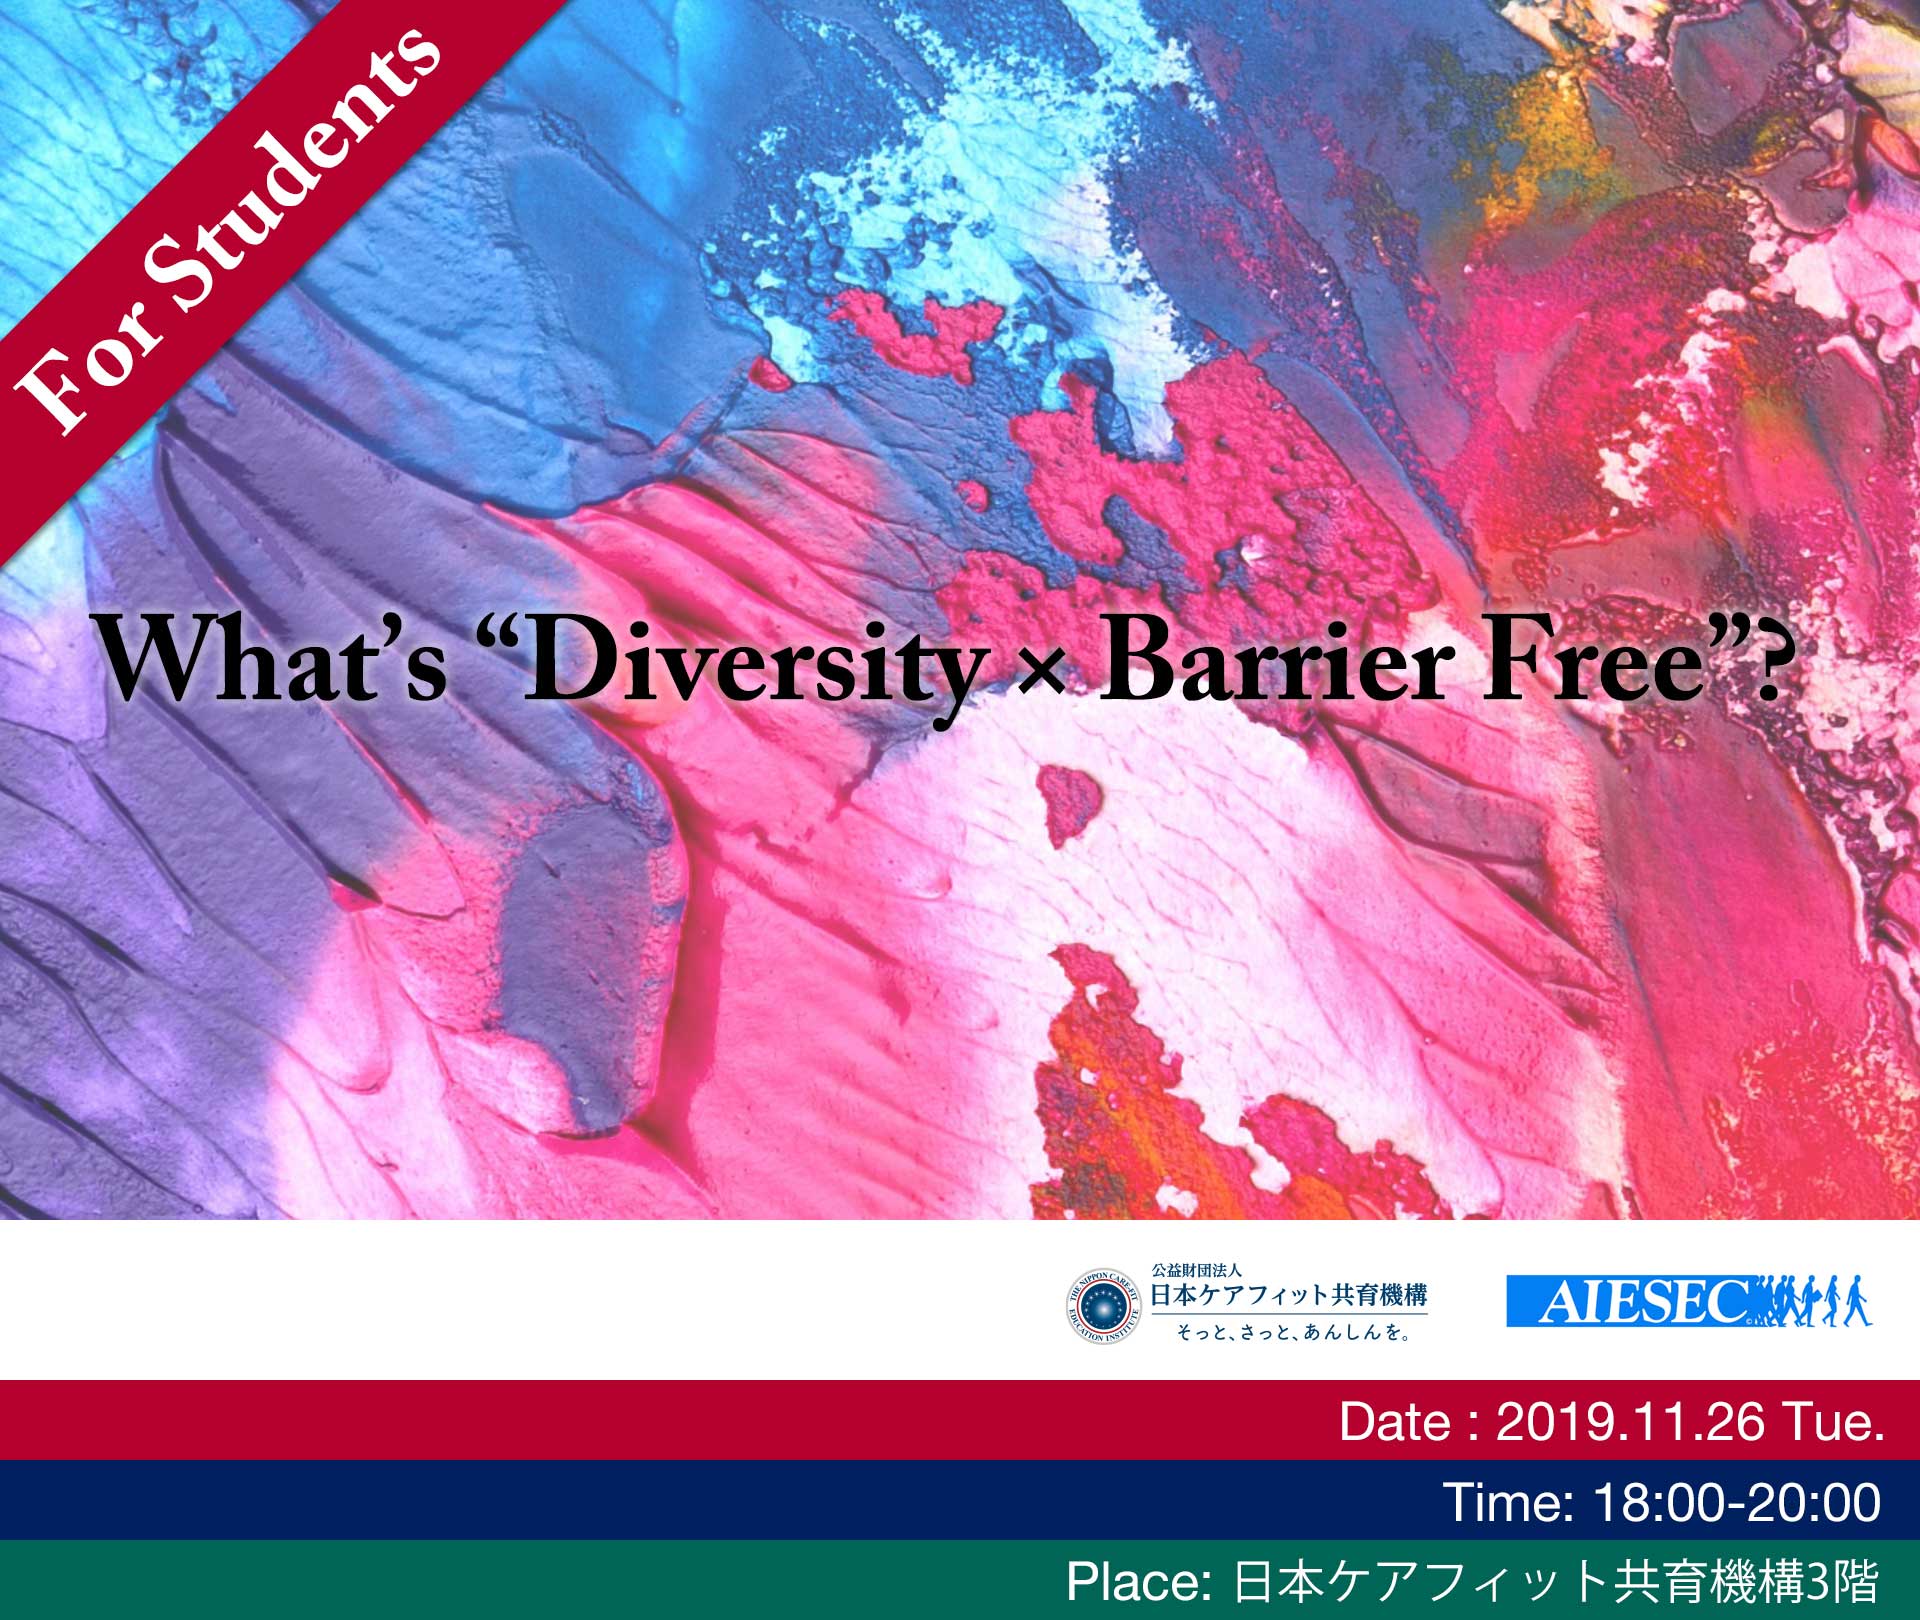 What’s “Diversity × Barrier Free”?